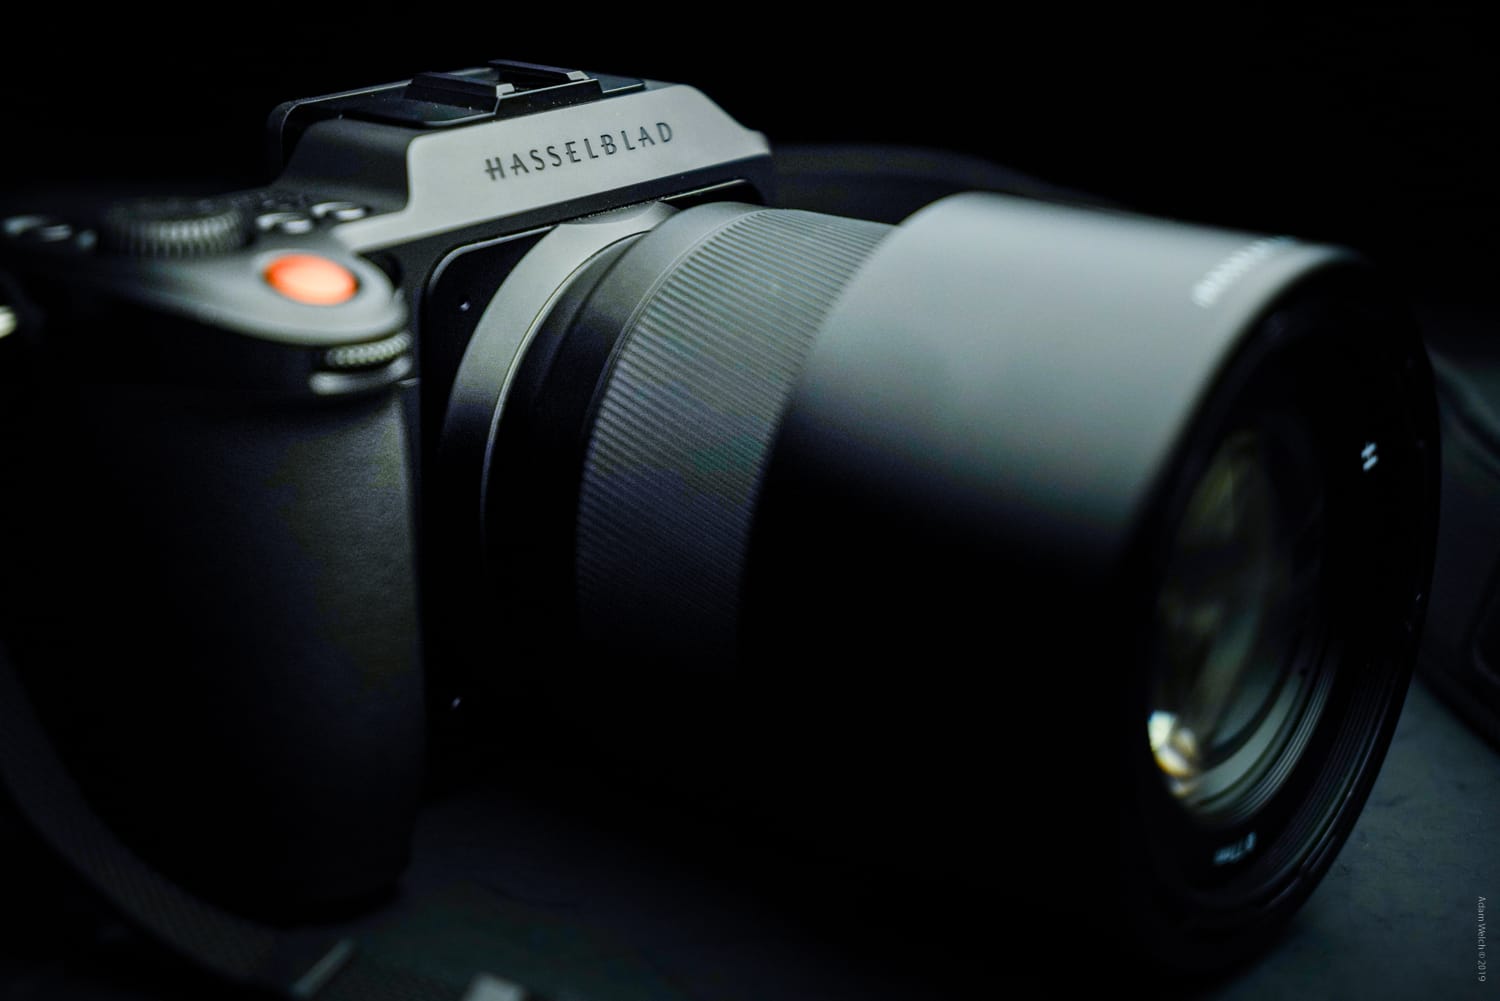 Review of the Hasselblad X1D II 50C Medium Format Mirrorless Camera